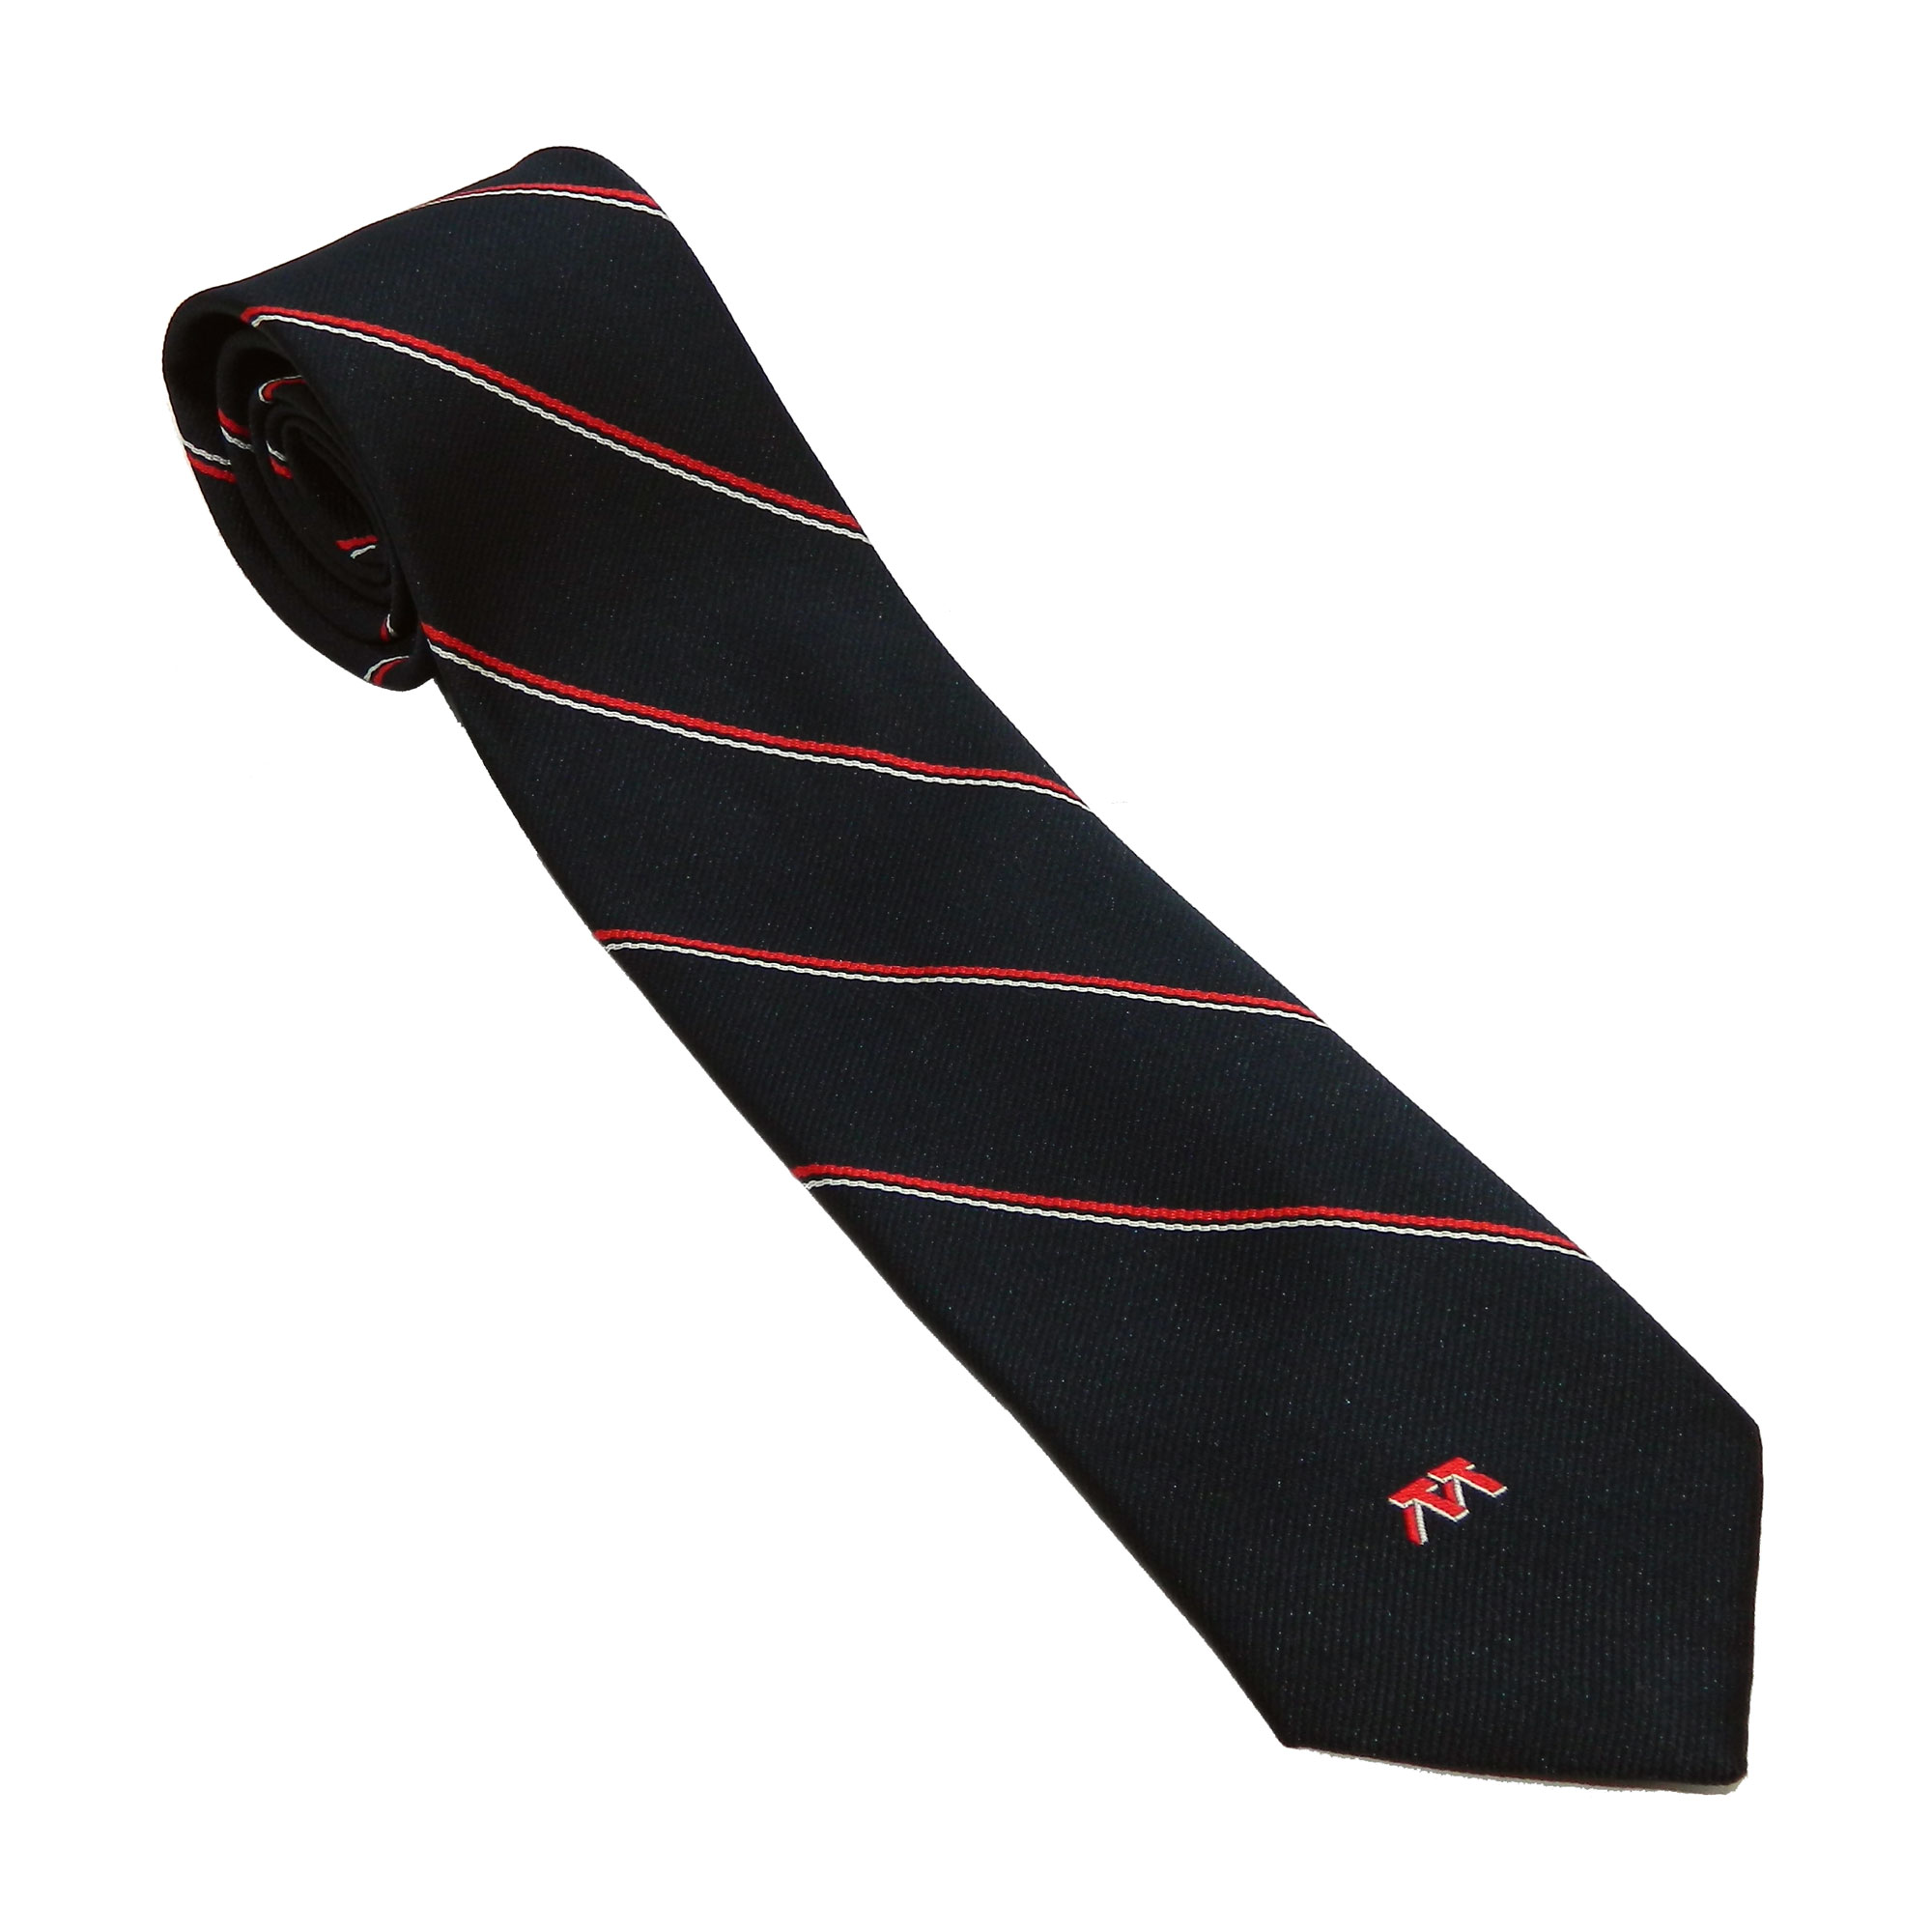 Red white and blue diagonally striped tie